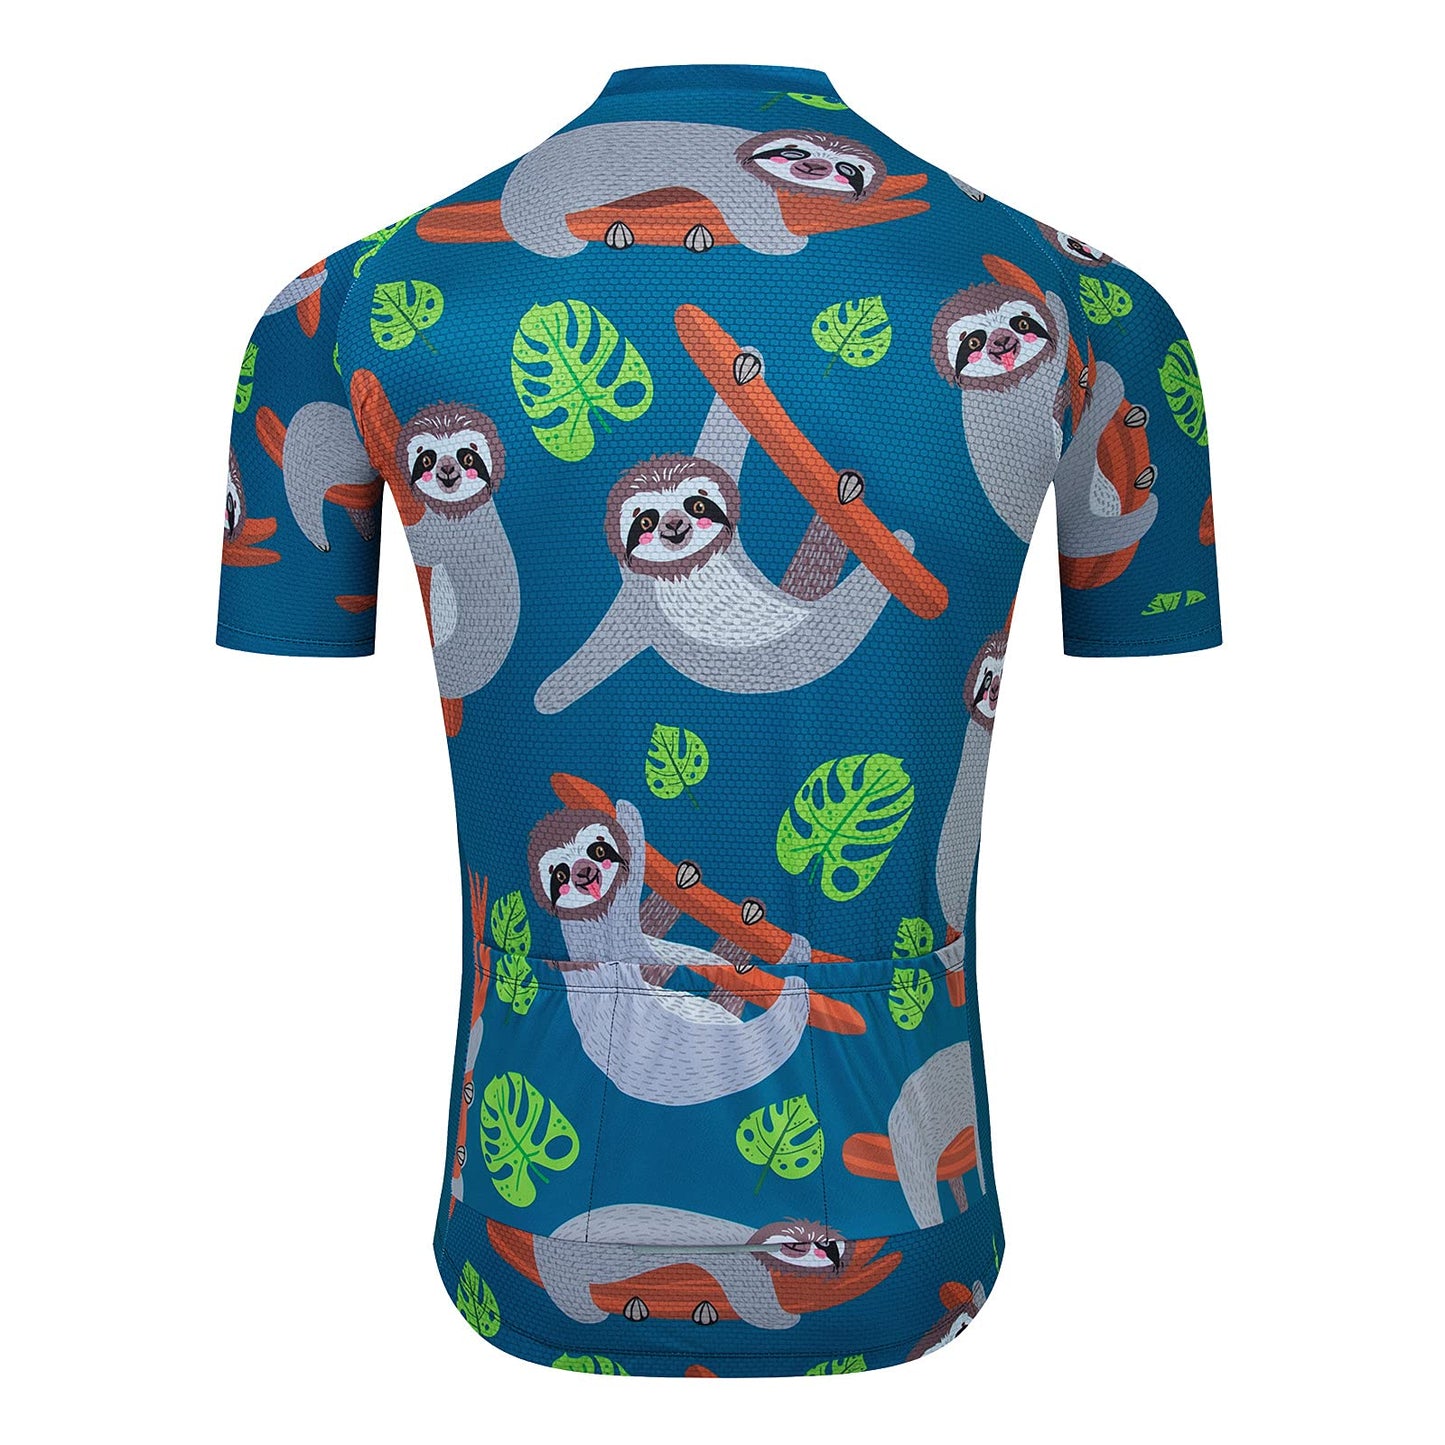 Sloth Leaf Blue Funny MTB Short Sleeve Cycling Jersey Top